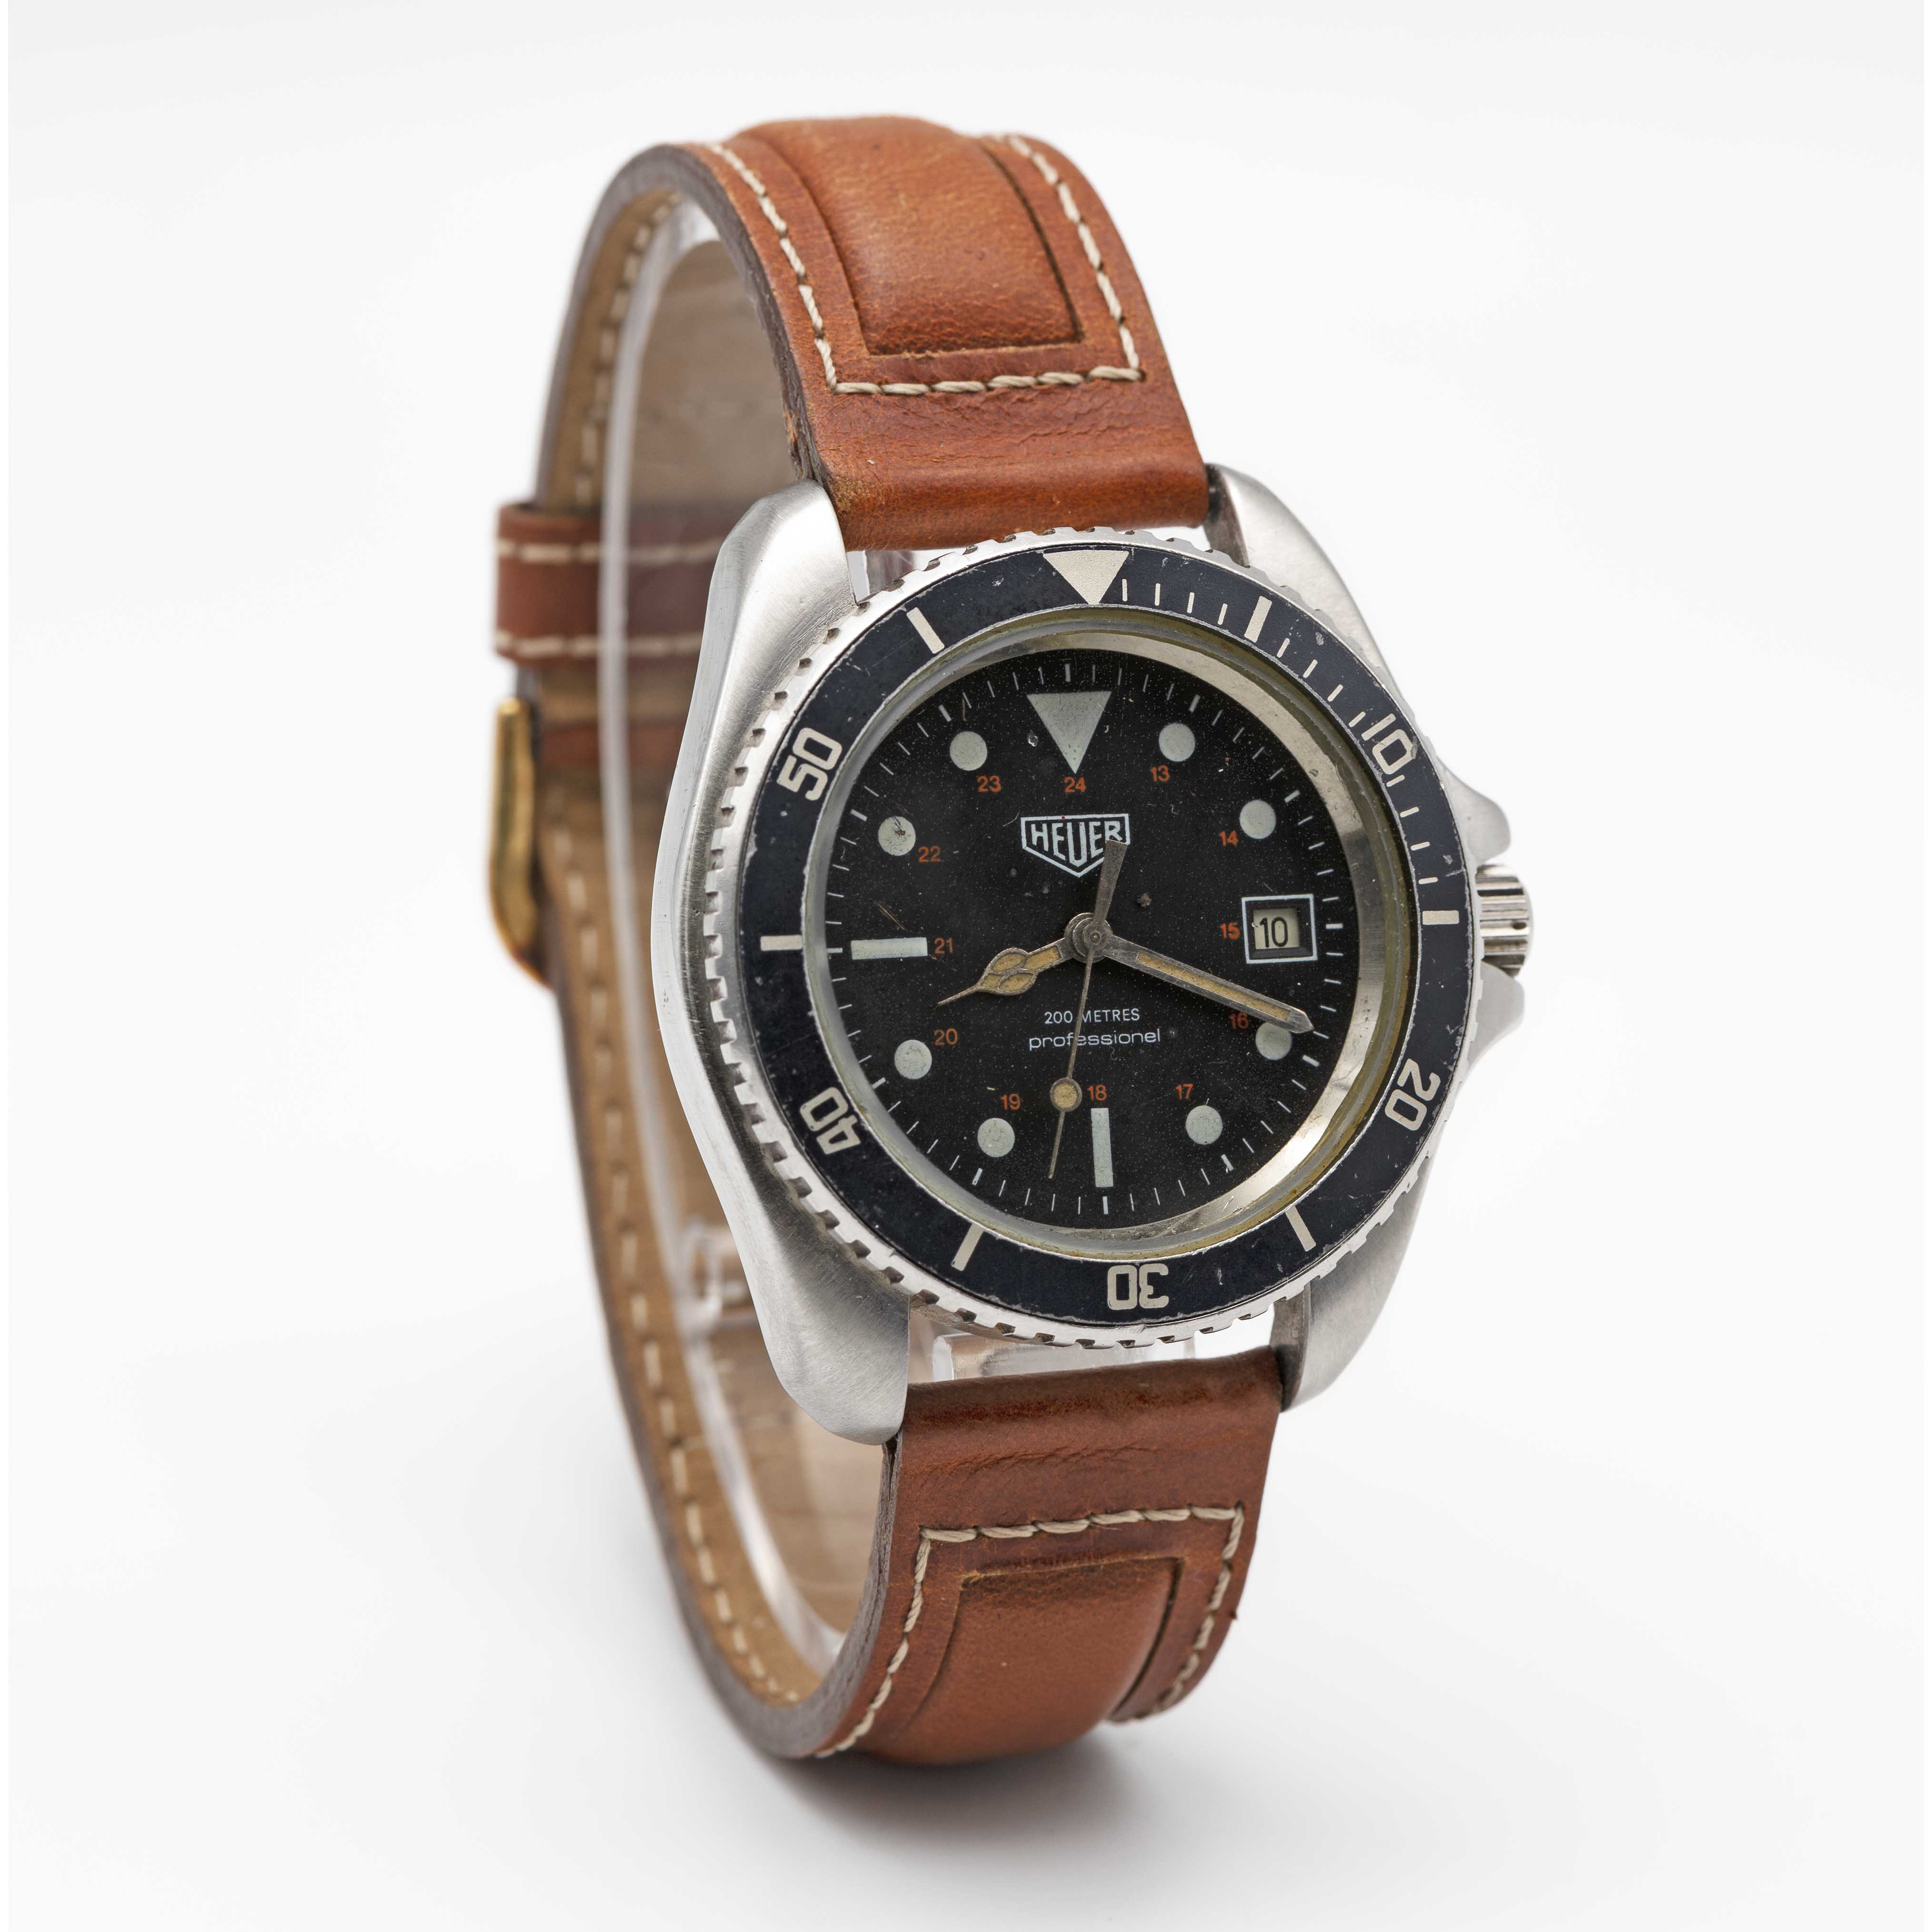 A GENTLEMAN'S STAINLESS STEEL HEUER 200 METRES PROFESSIONEL AUTOMATIC DIVERS WRIST WATCH CIRCA - Image 4 of 8